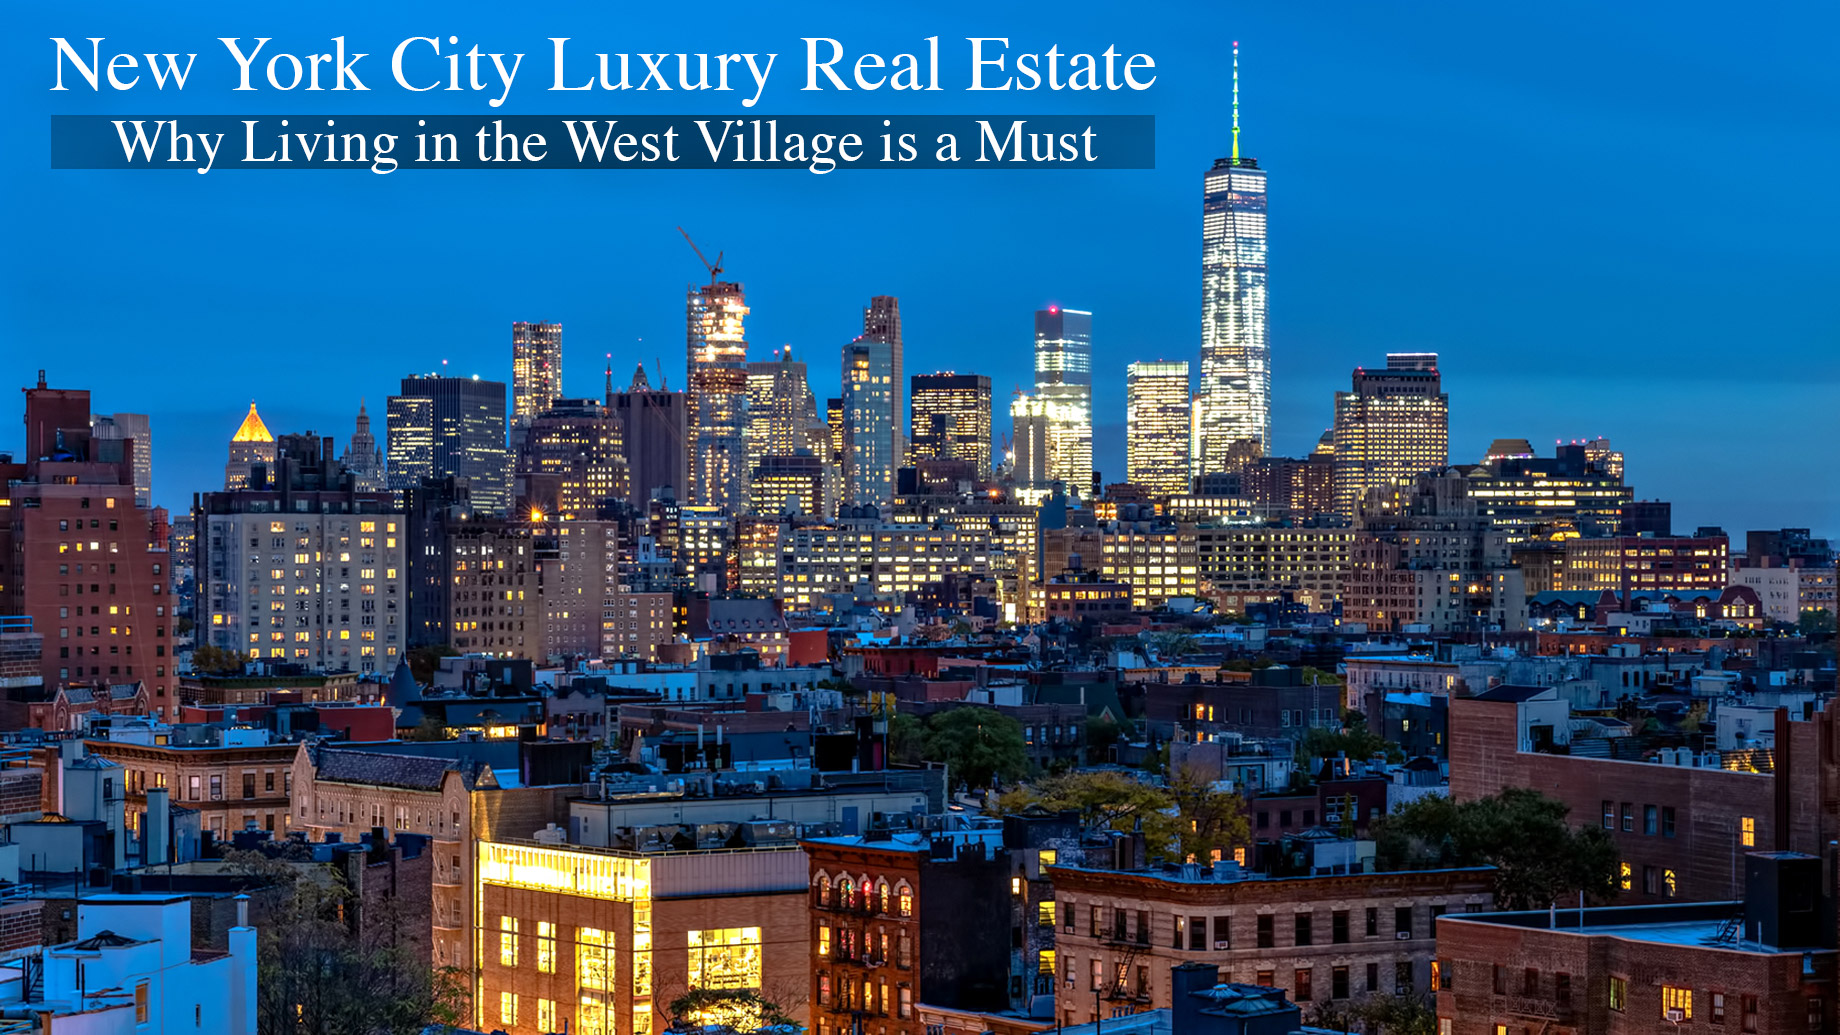 New York City Luxury Real Estate - Why Living in the West Village is a Must